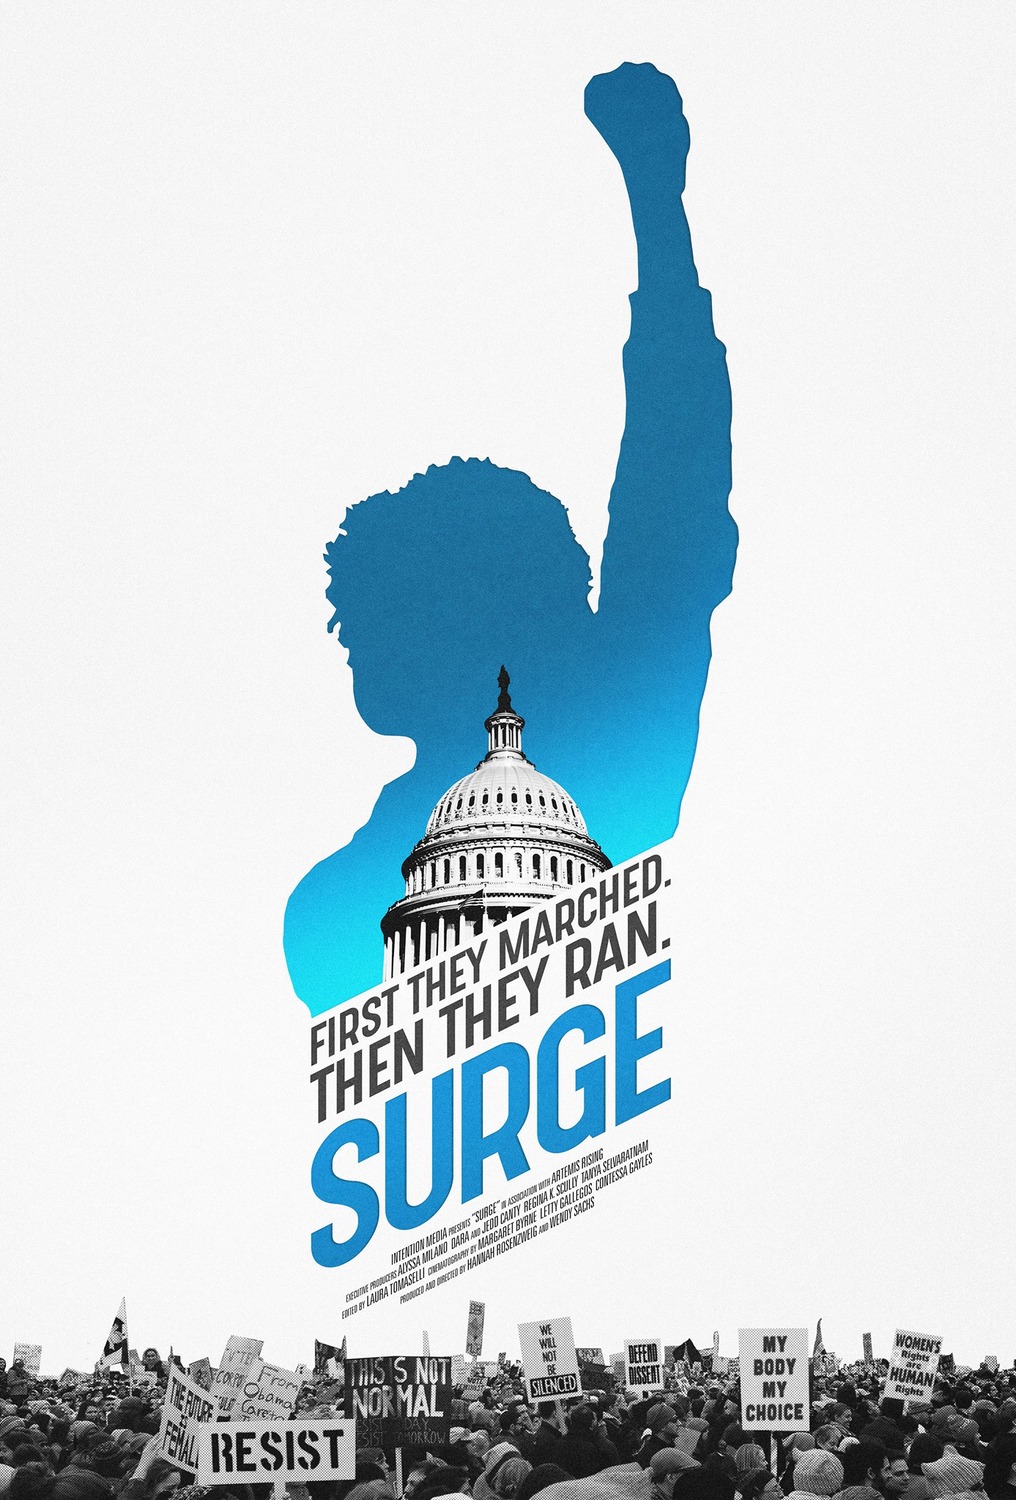 Extra Large Movie Poster Image for Surge 